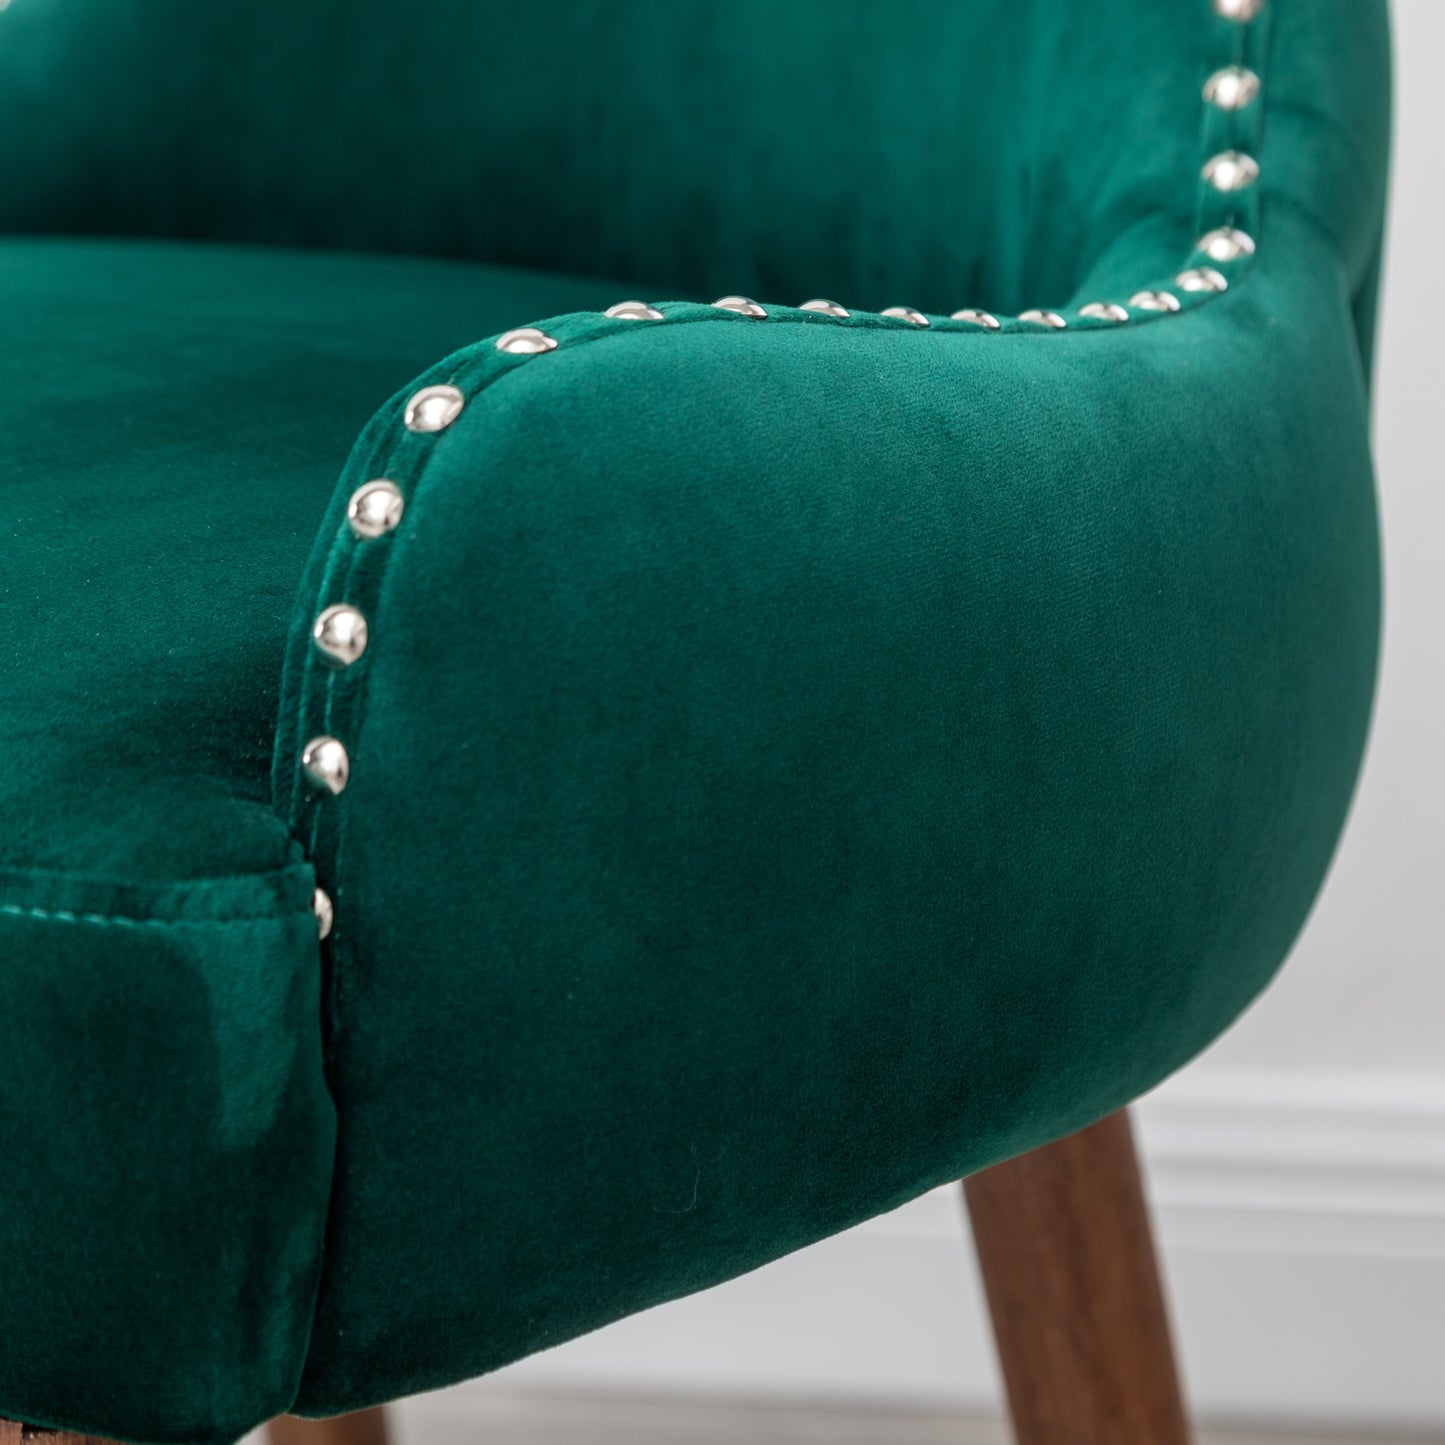 Lindale Contemporary Velvet Upholstered Nailhead Trim Accent Chair, Green